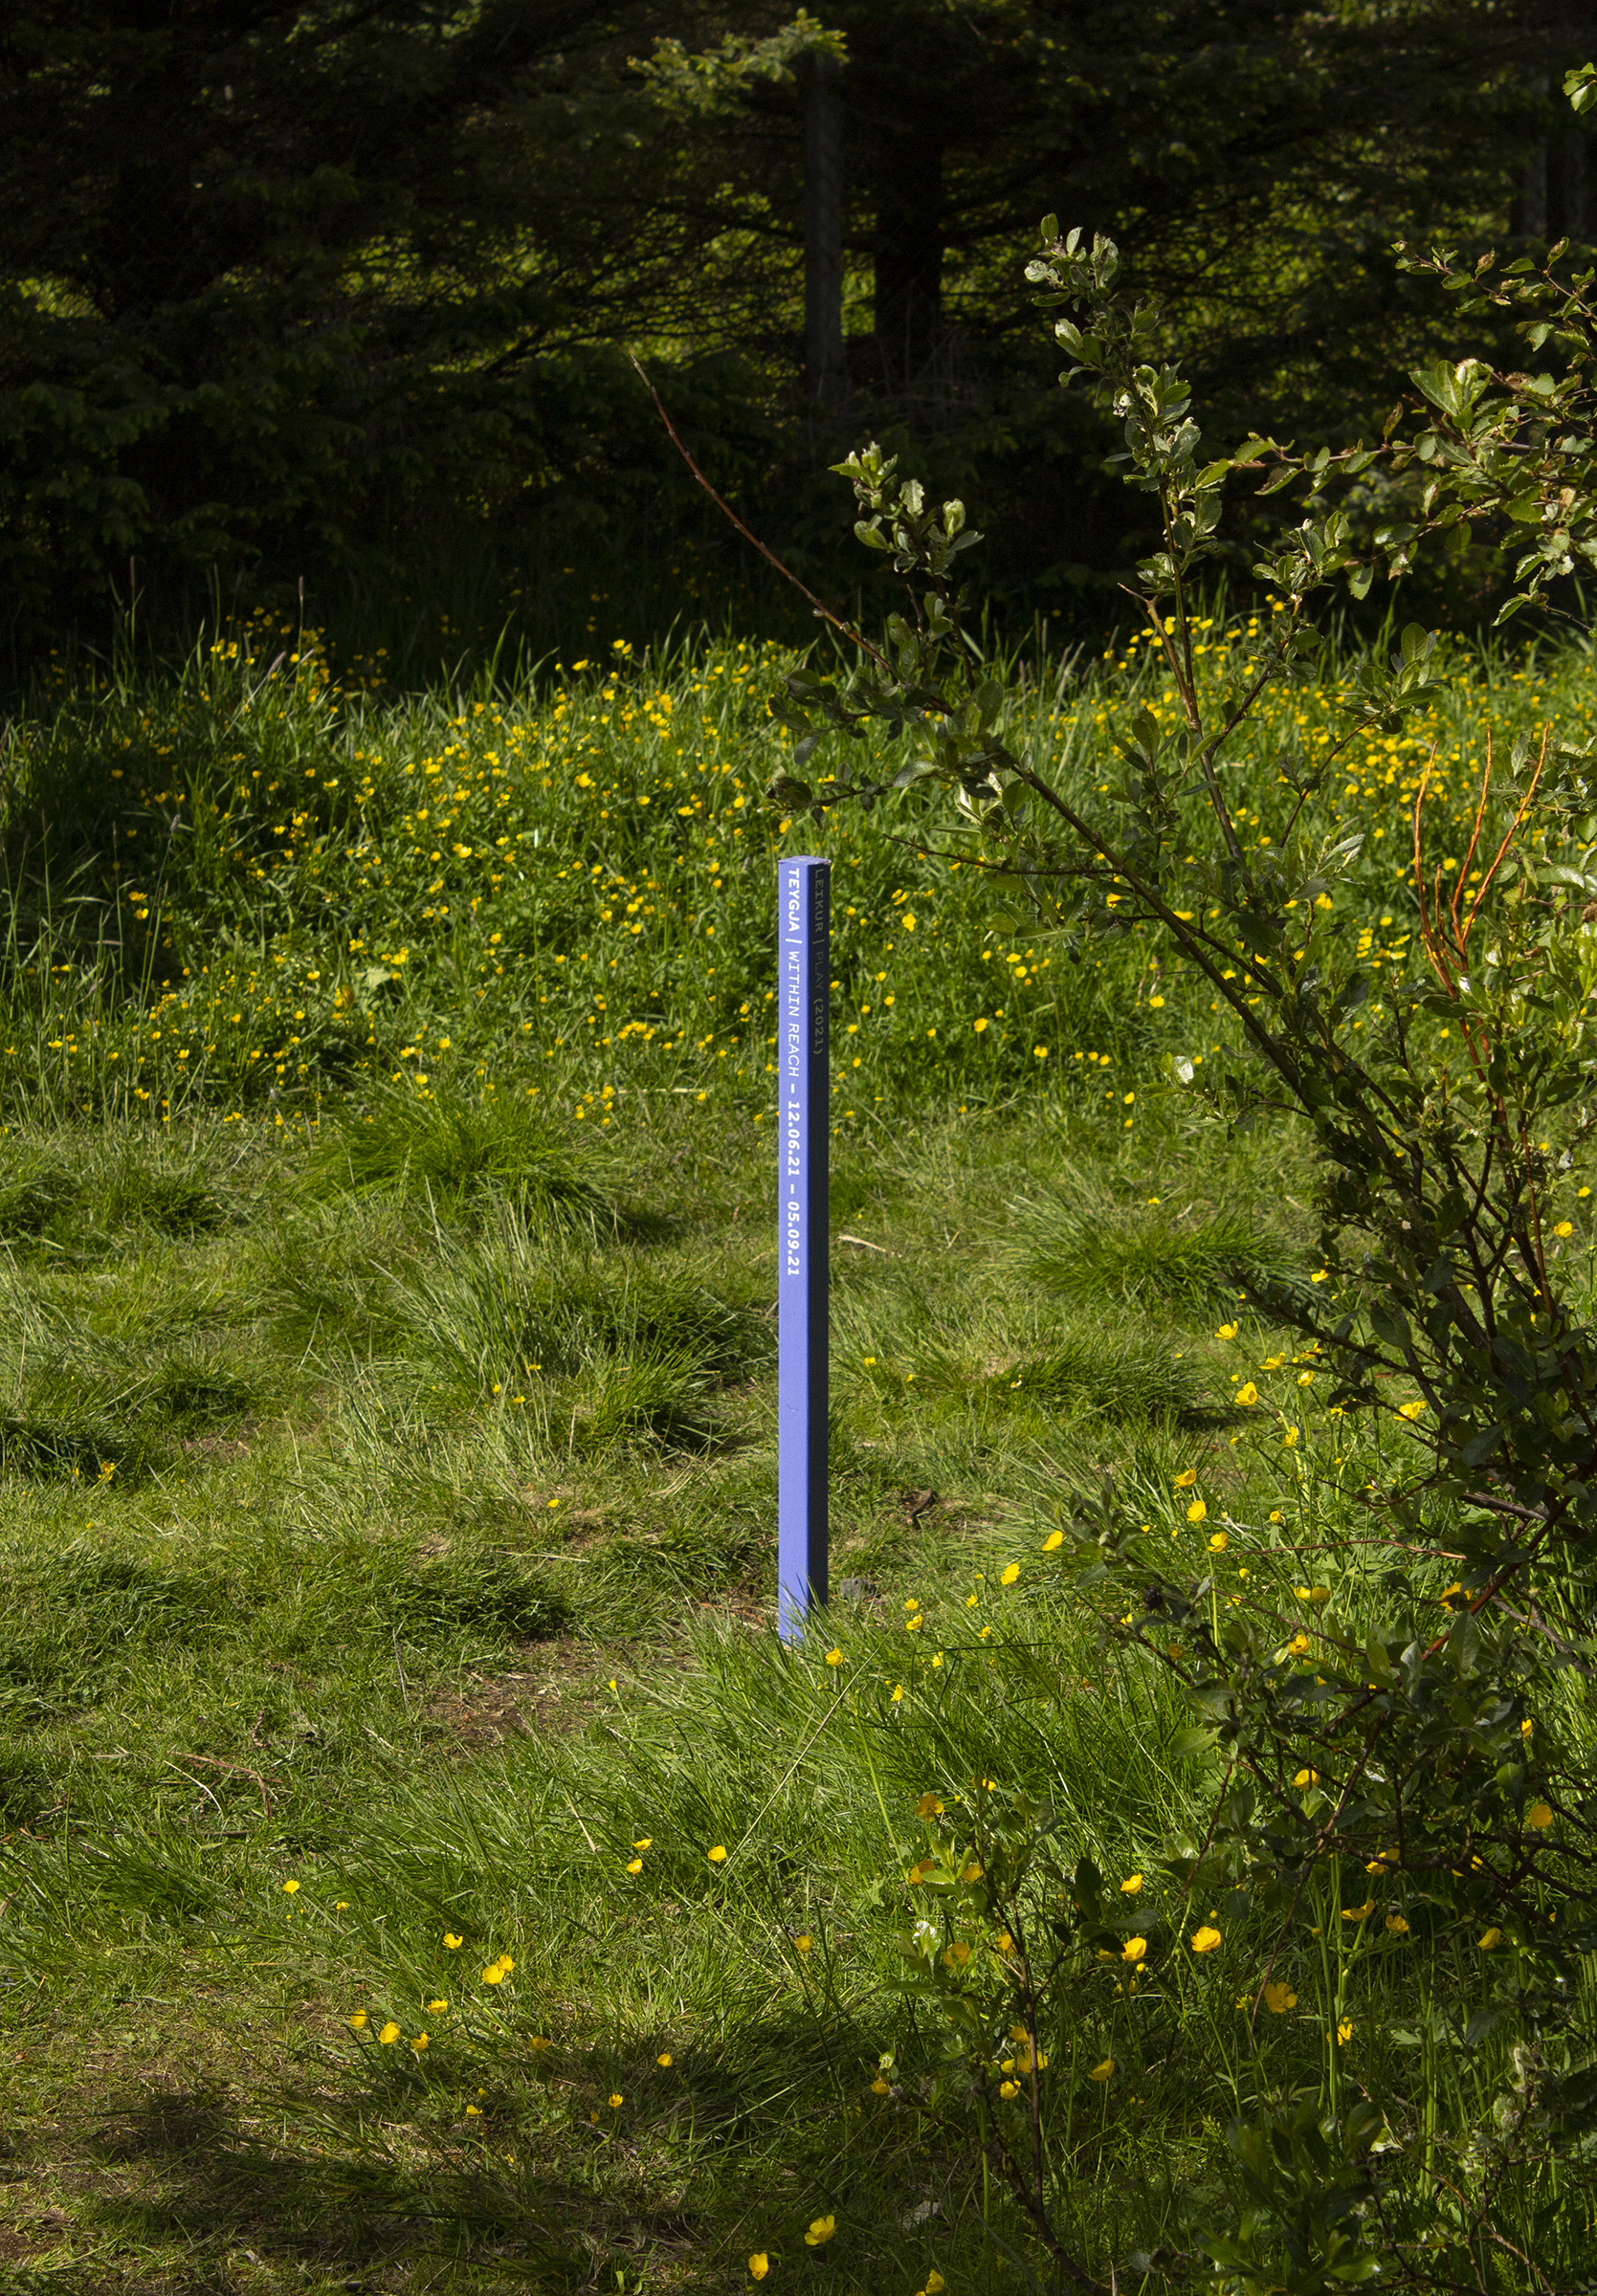 A purple marker post with exhibition information in white vinyl standing in the middle of a lush Icelandic hollow.